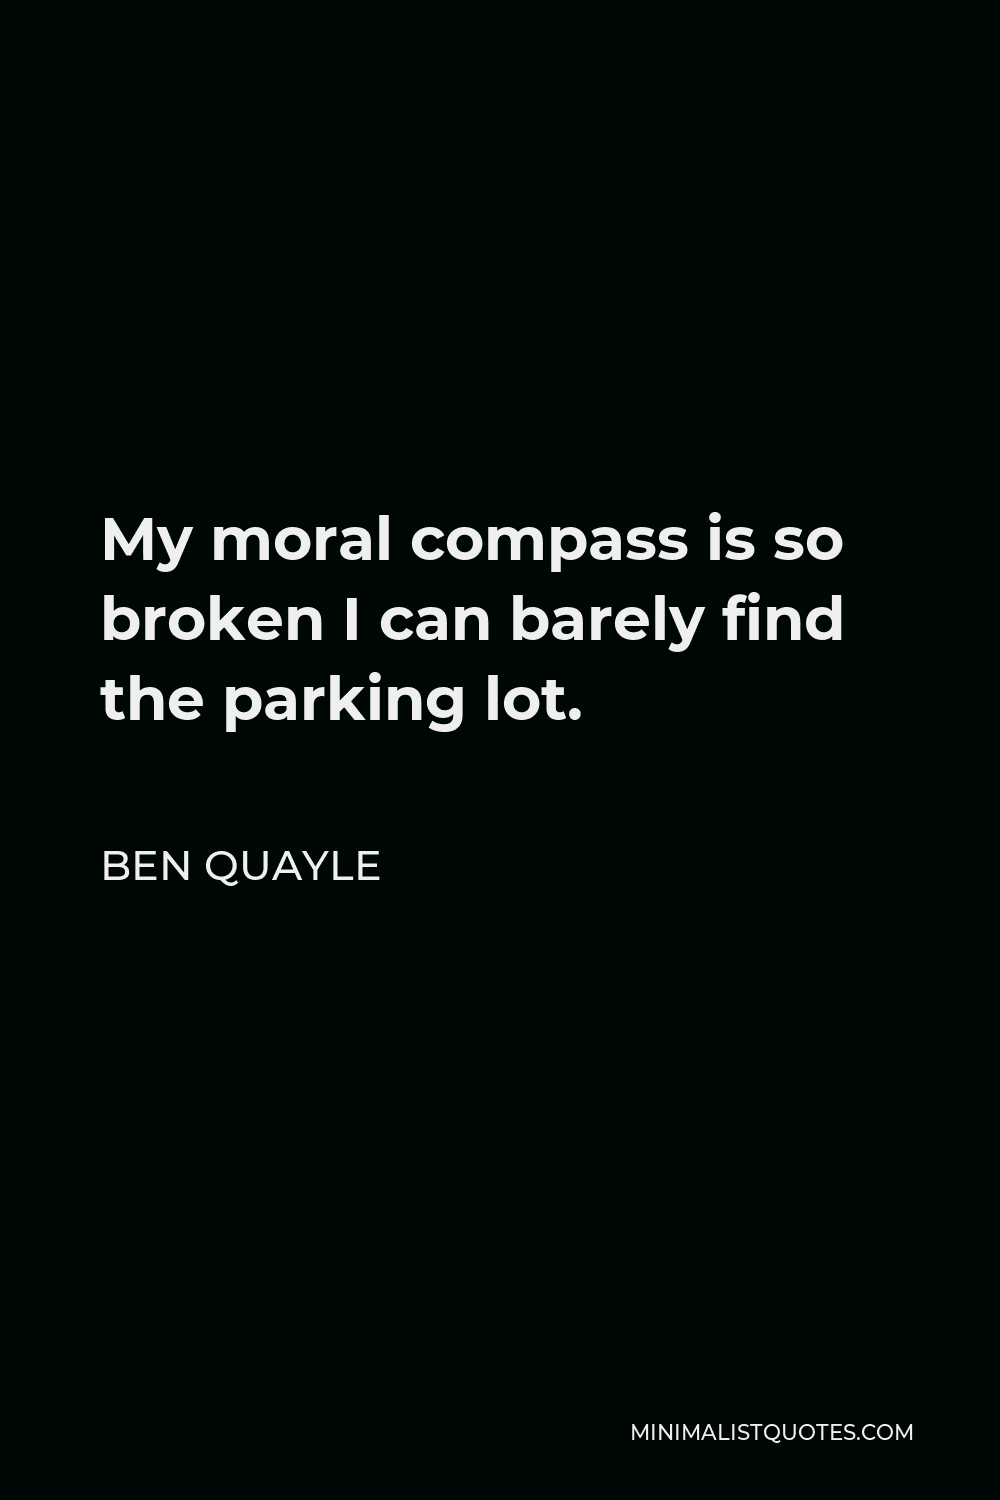 Ben Quayle Quote - My moral compass is so broken I can barely find the parking lot.